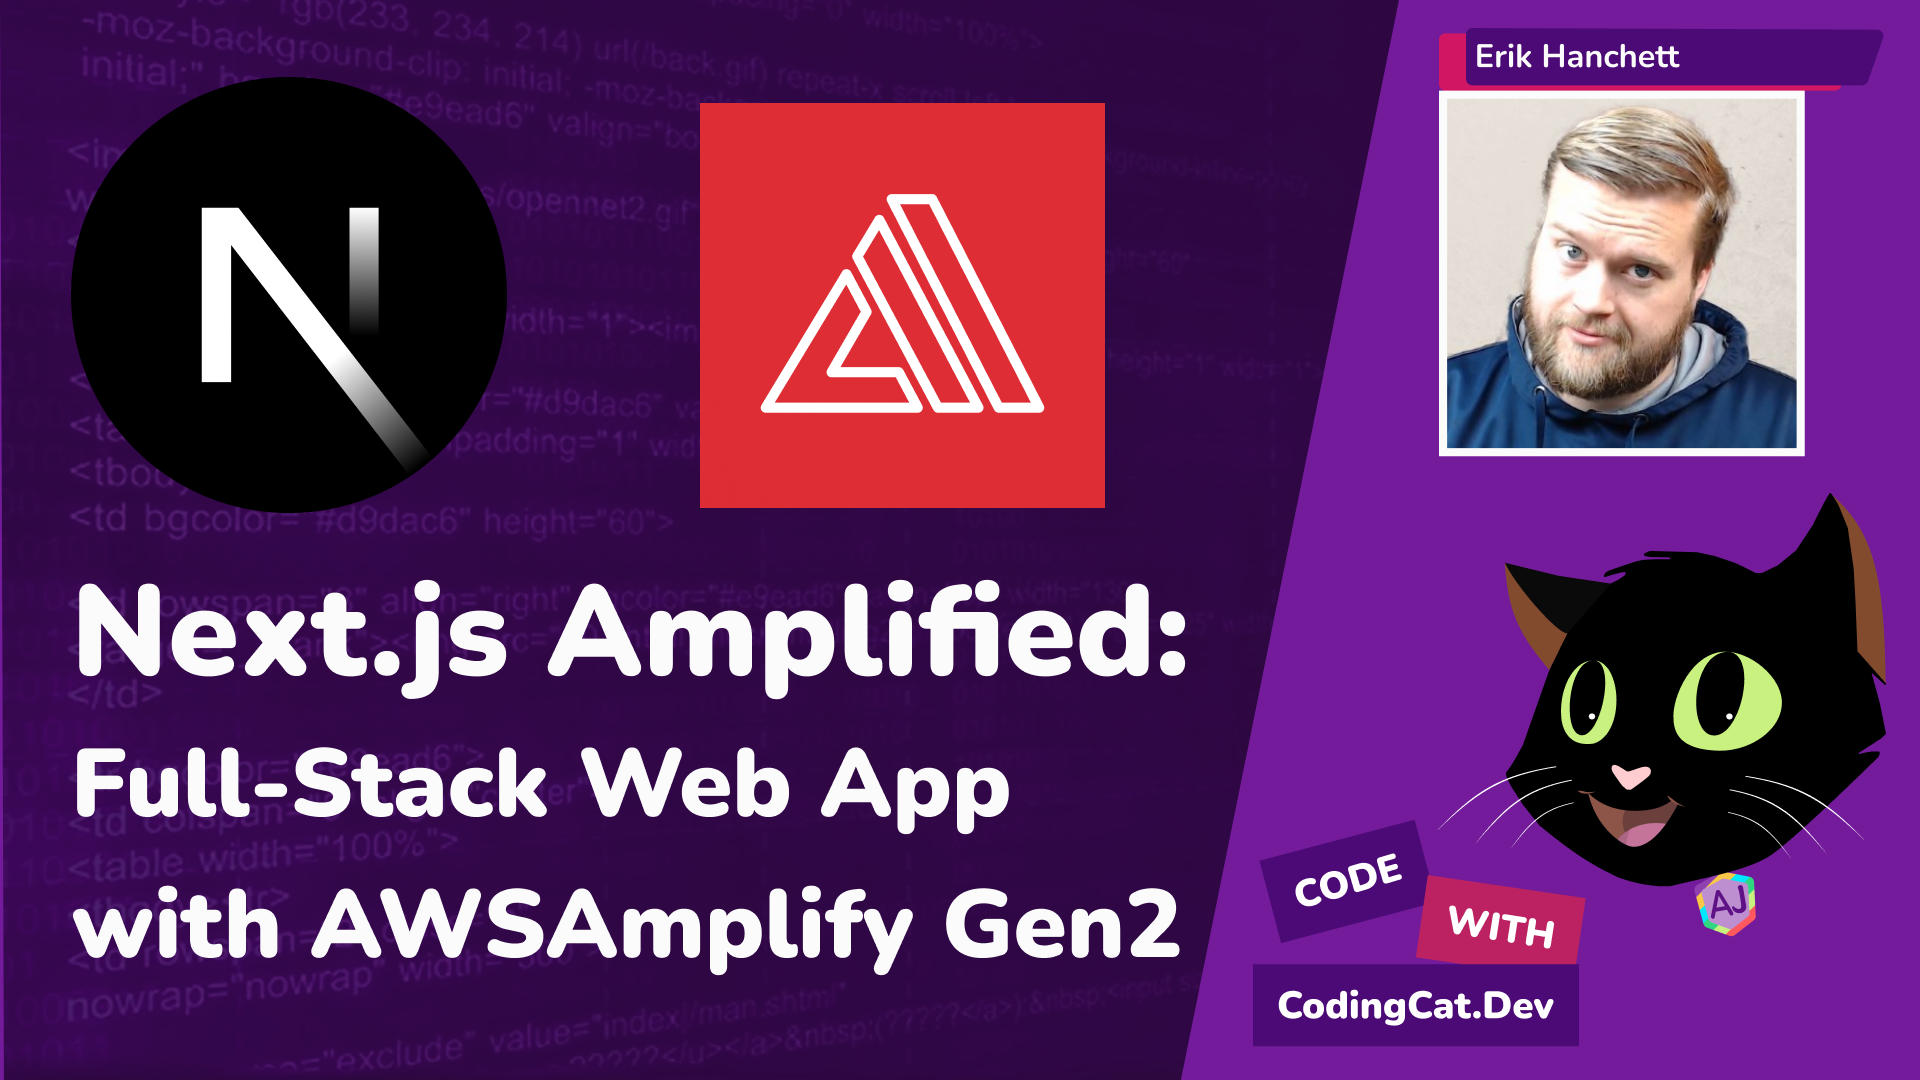 Next.js Amplified: Full-Stack Web Apps on AWS Amplify Gen2